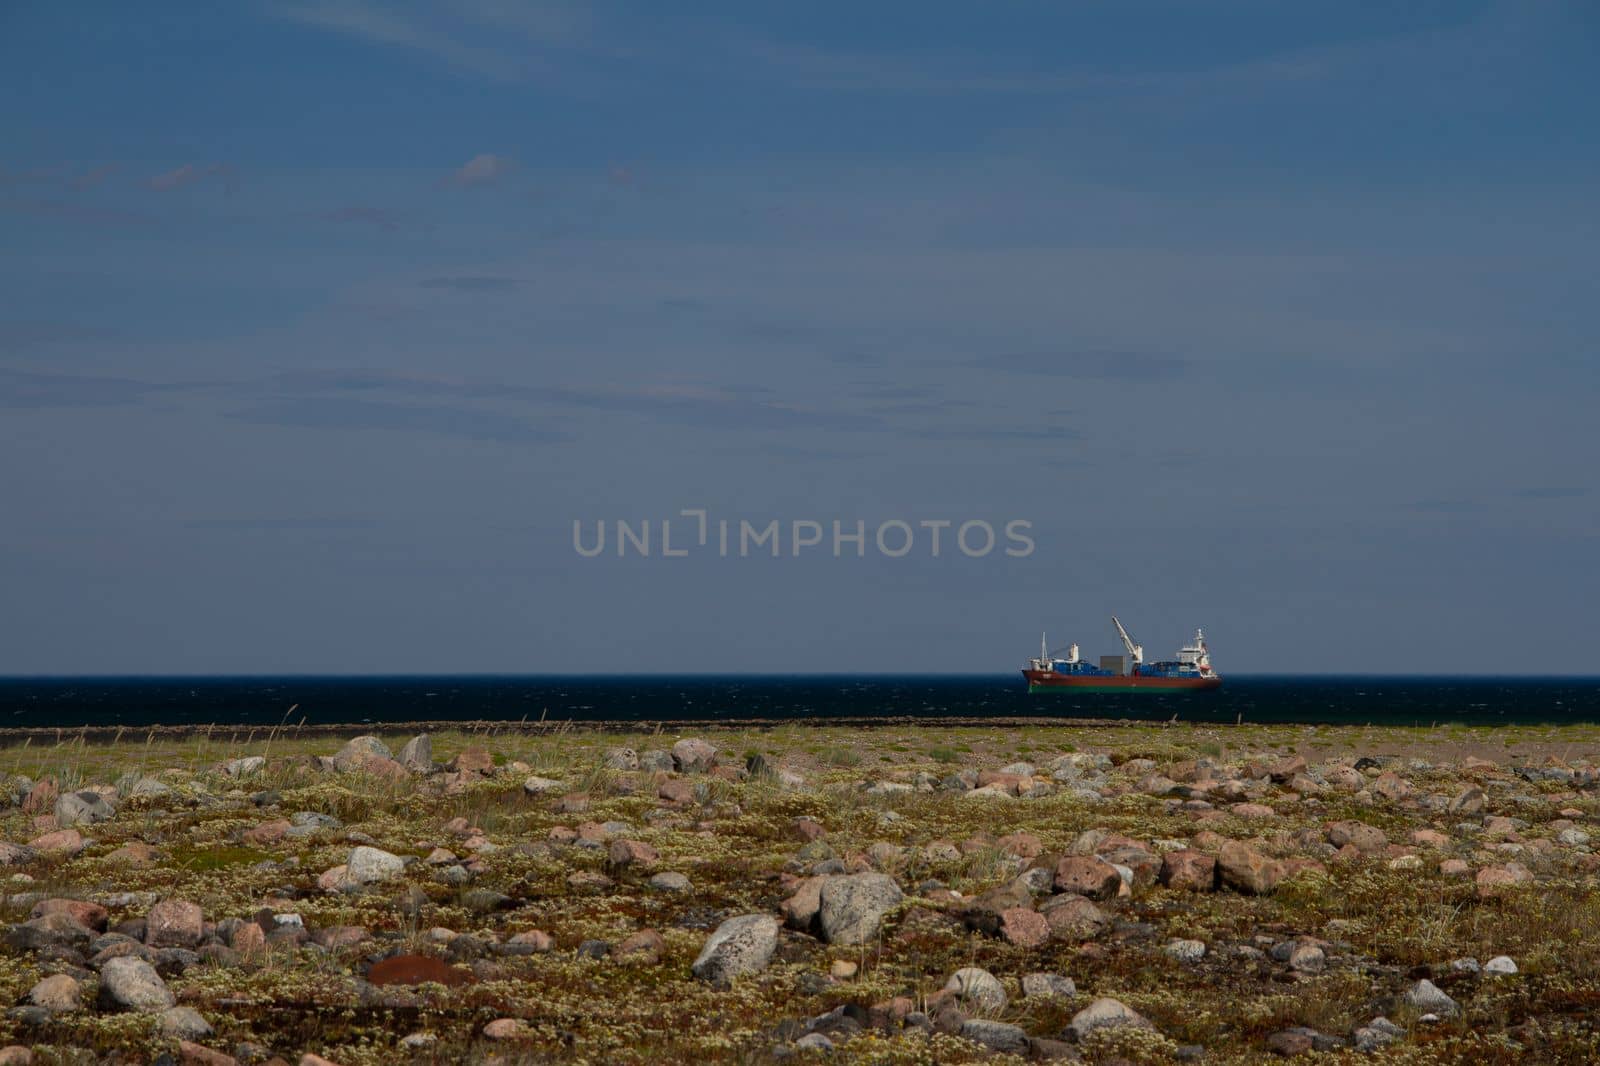 Fuel barge or tanker ship off the coast of Hudson Bay waiting to provide fuel for an arctic community by Granchinho